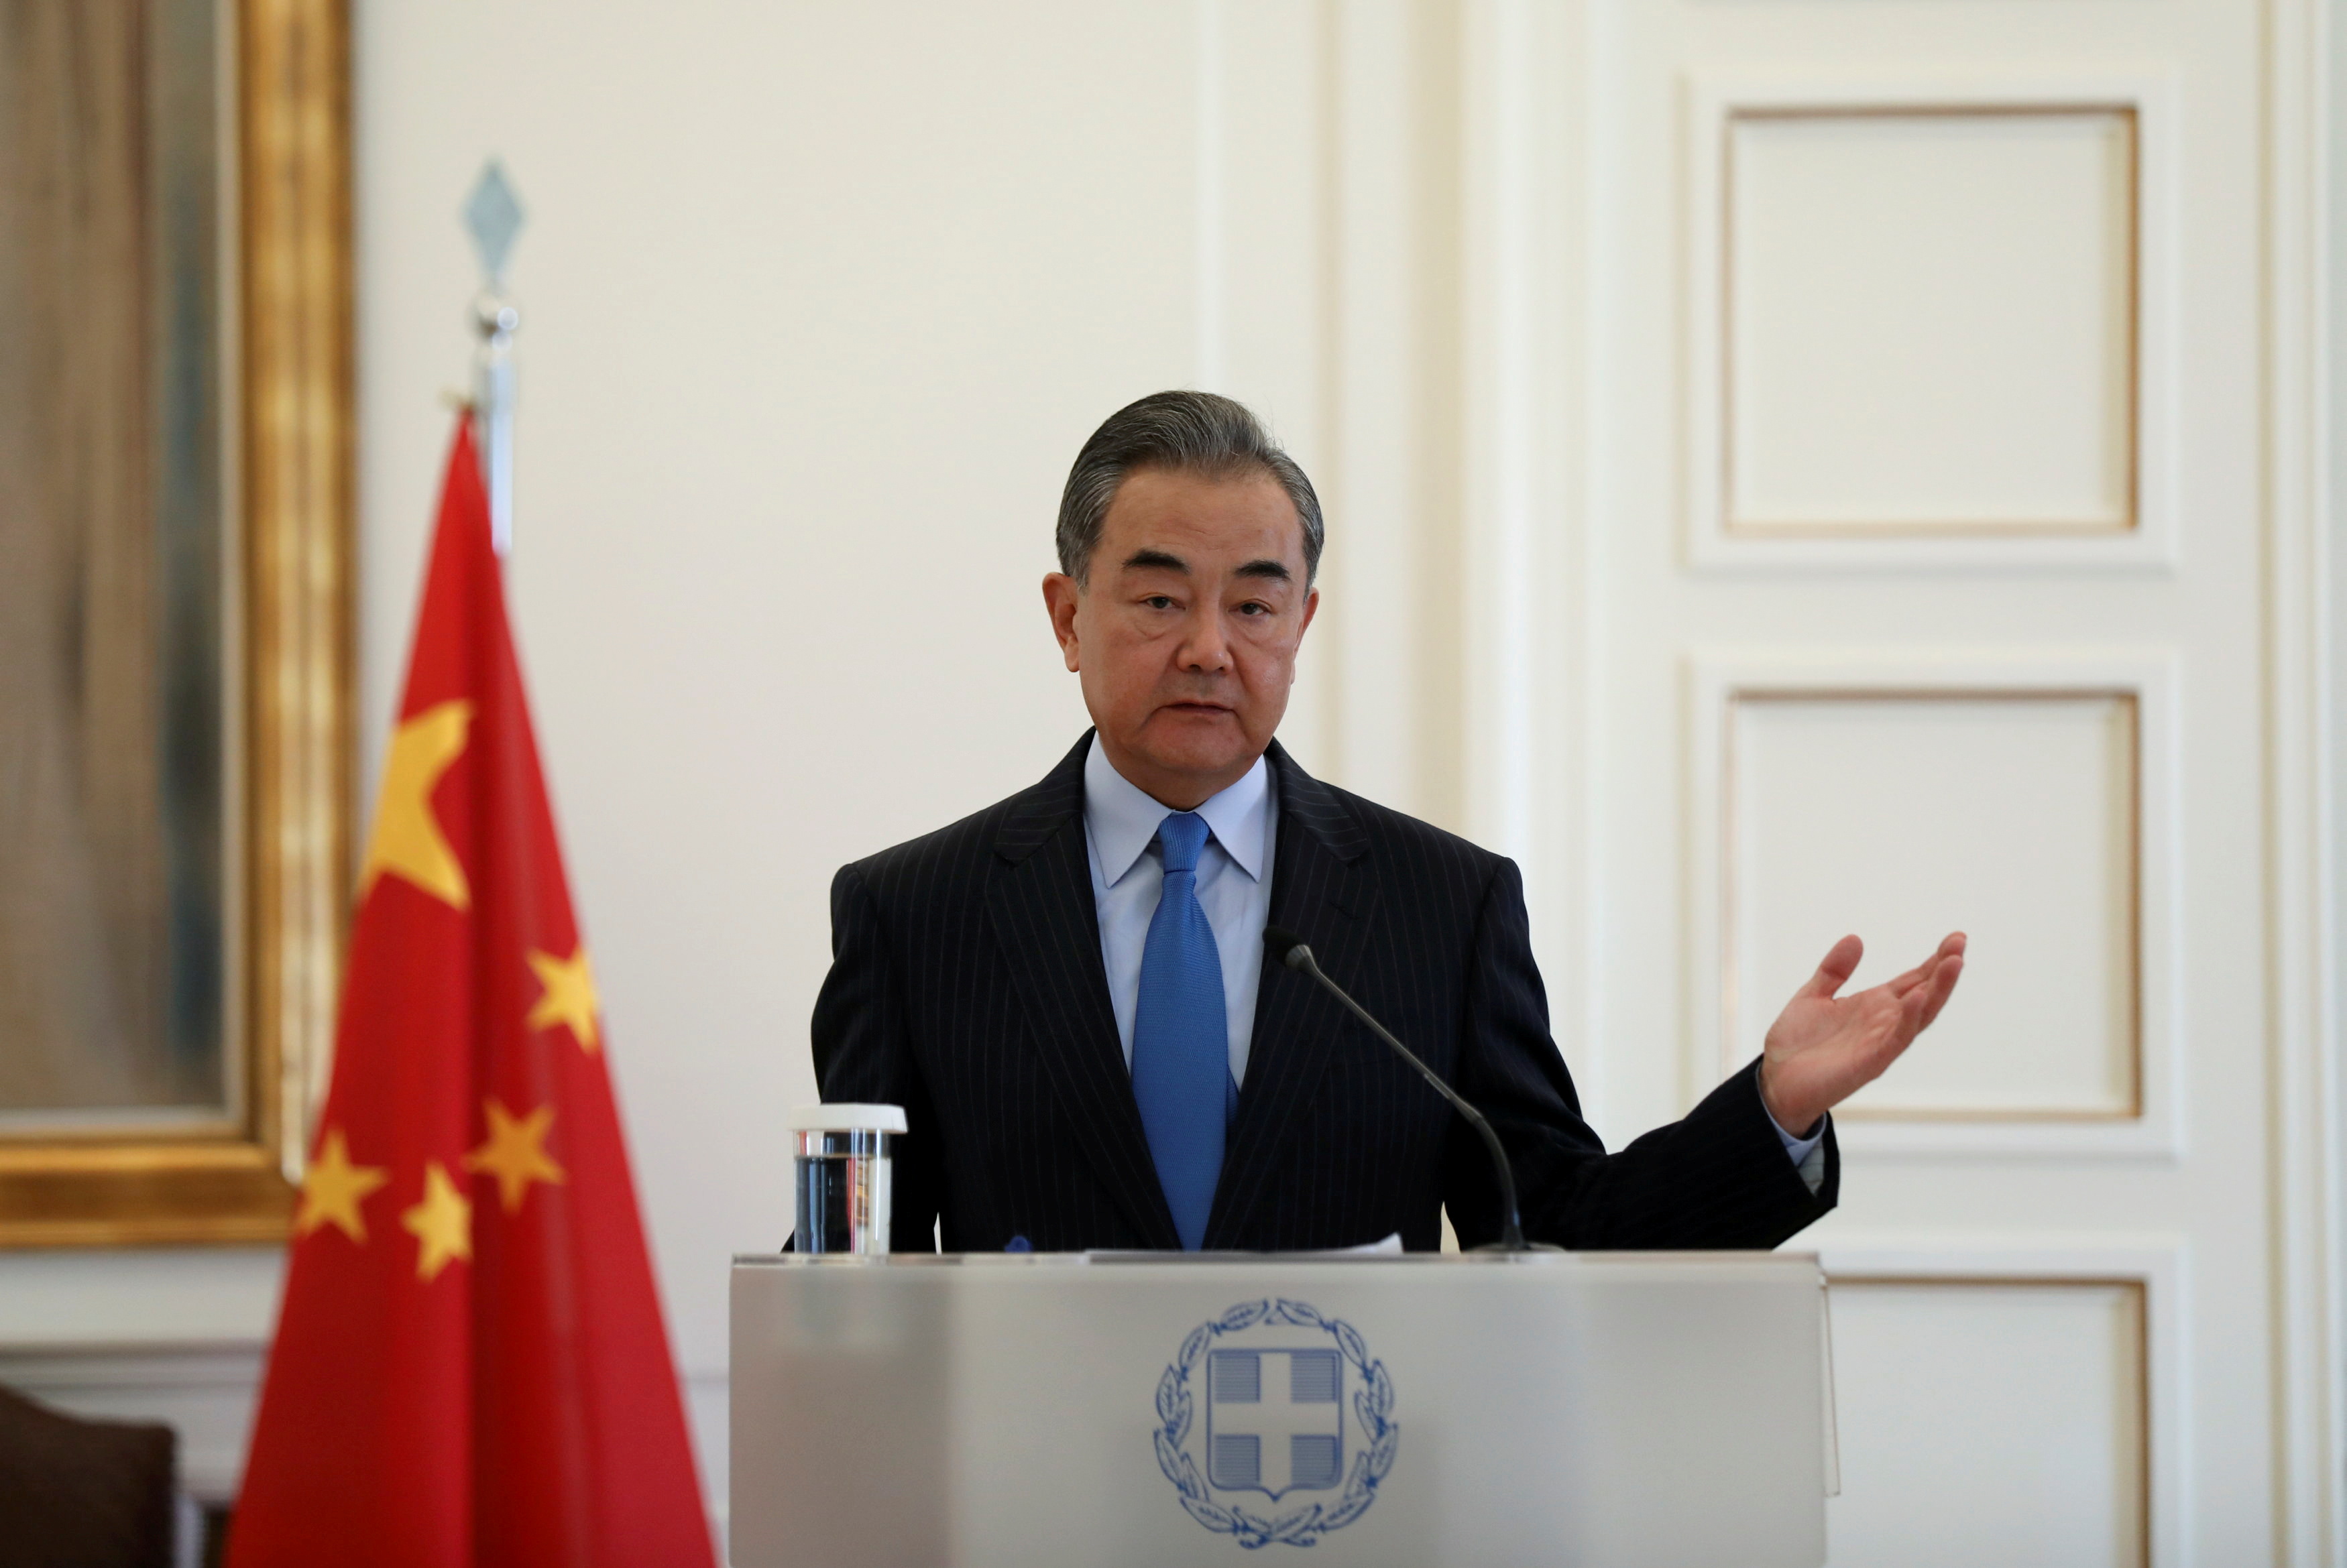 China's State Councillor and Foreign Minister Wang Yi attends a news conference following talks in Athens, Greece